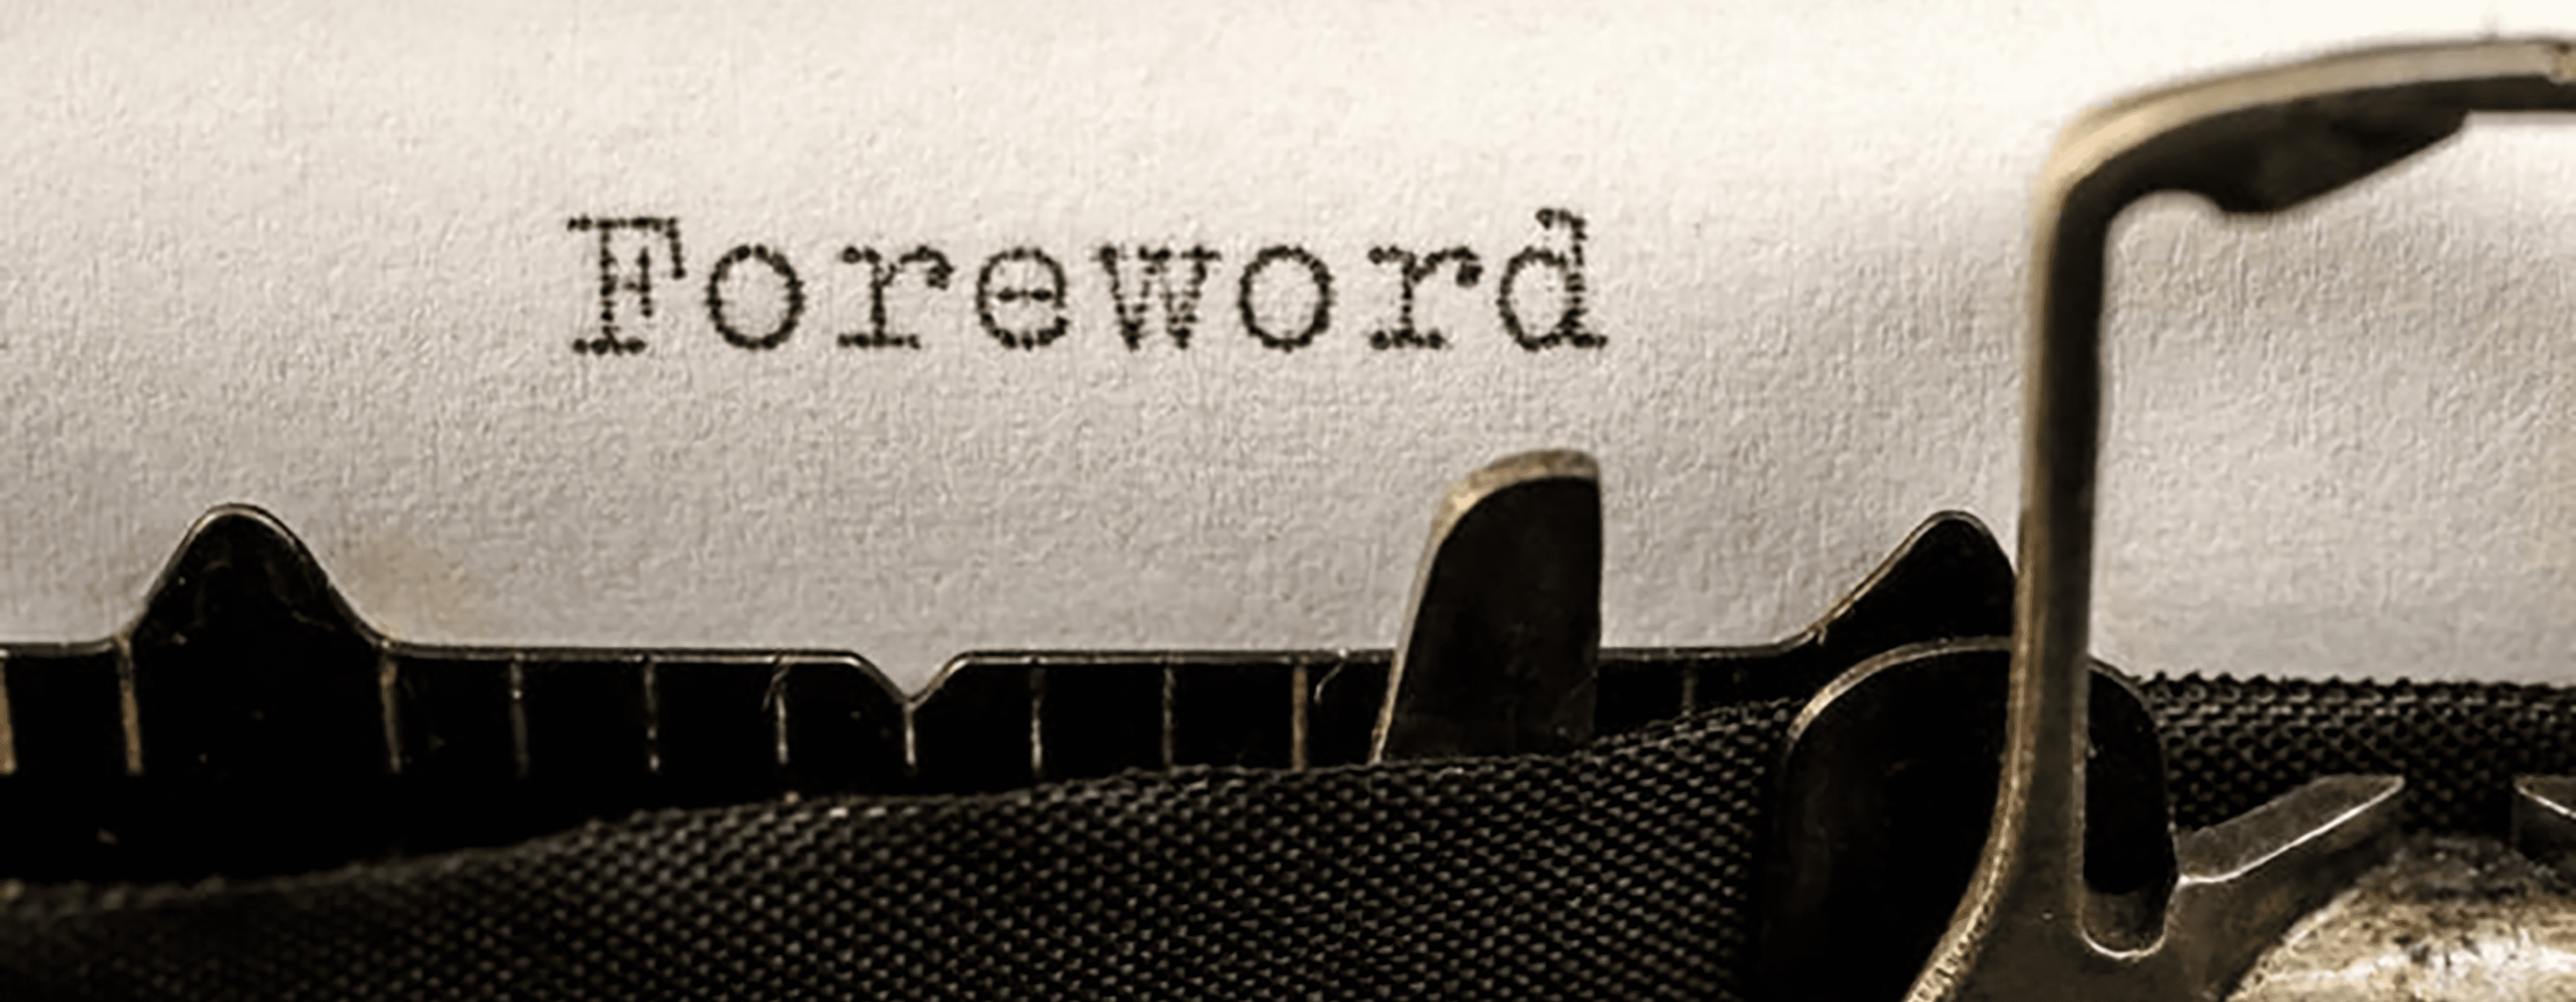 How to get a foreword or testimonials for your book